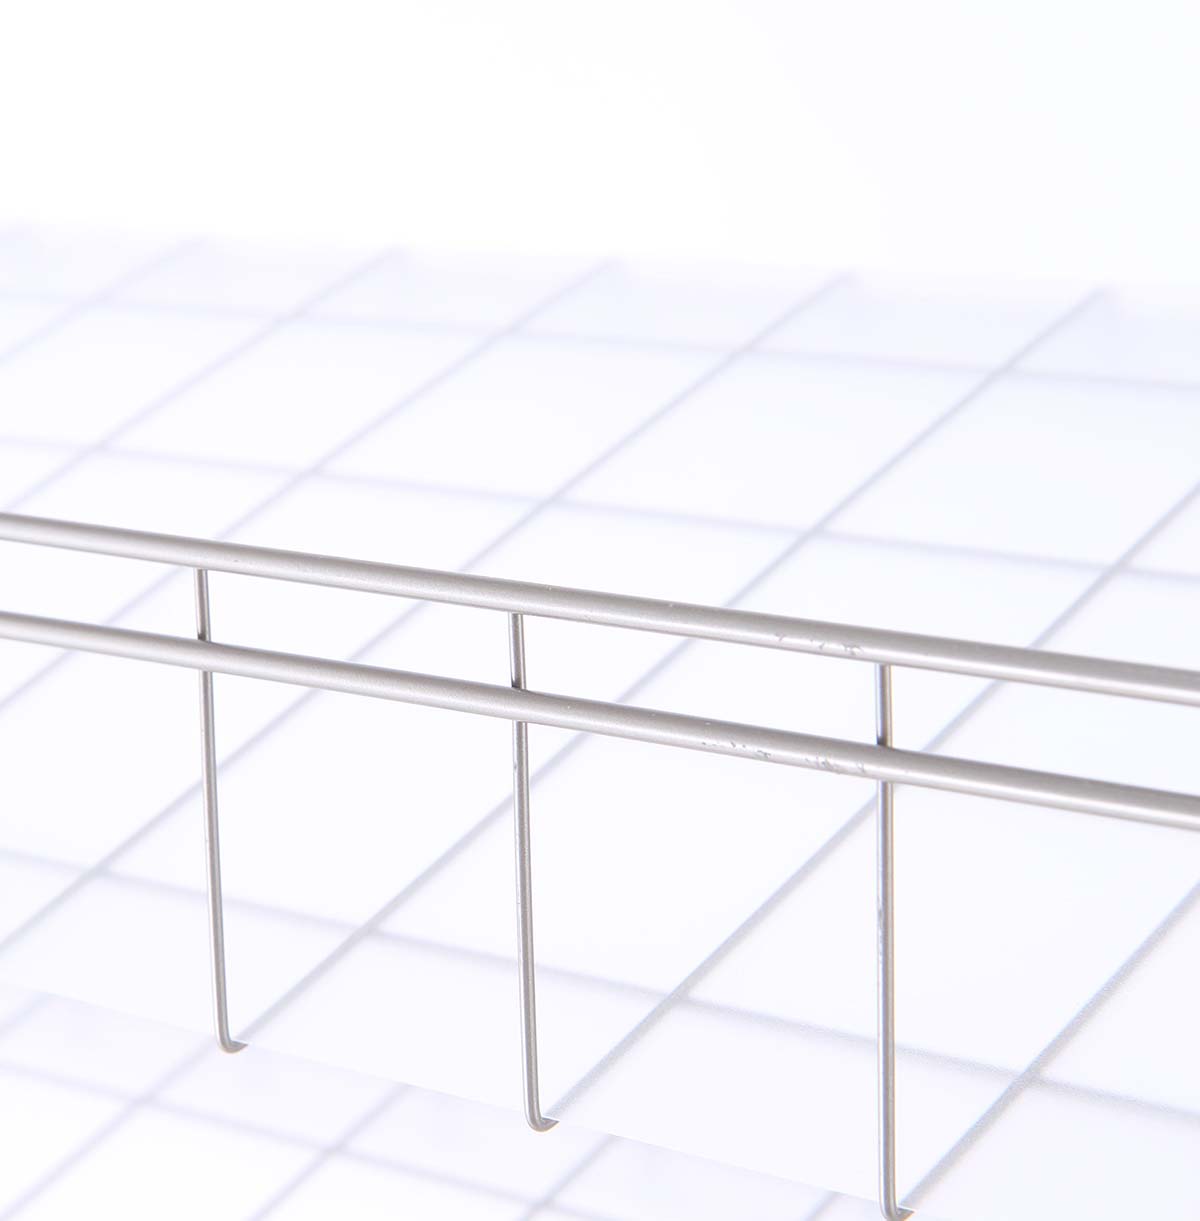 wire shelving unit with baskets